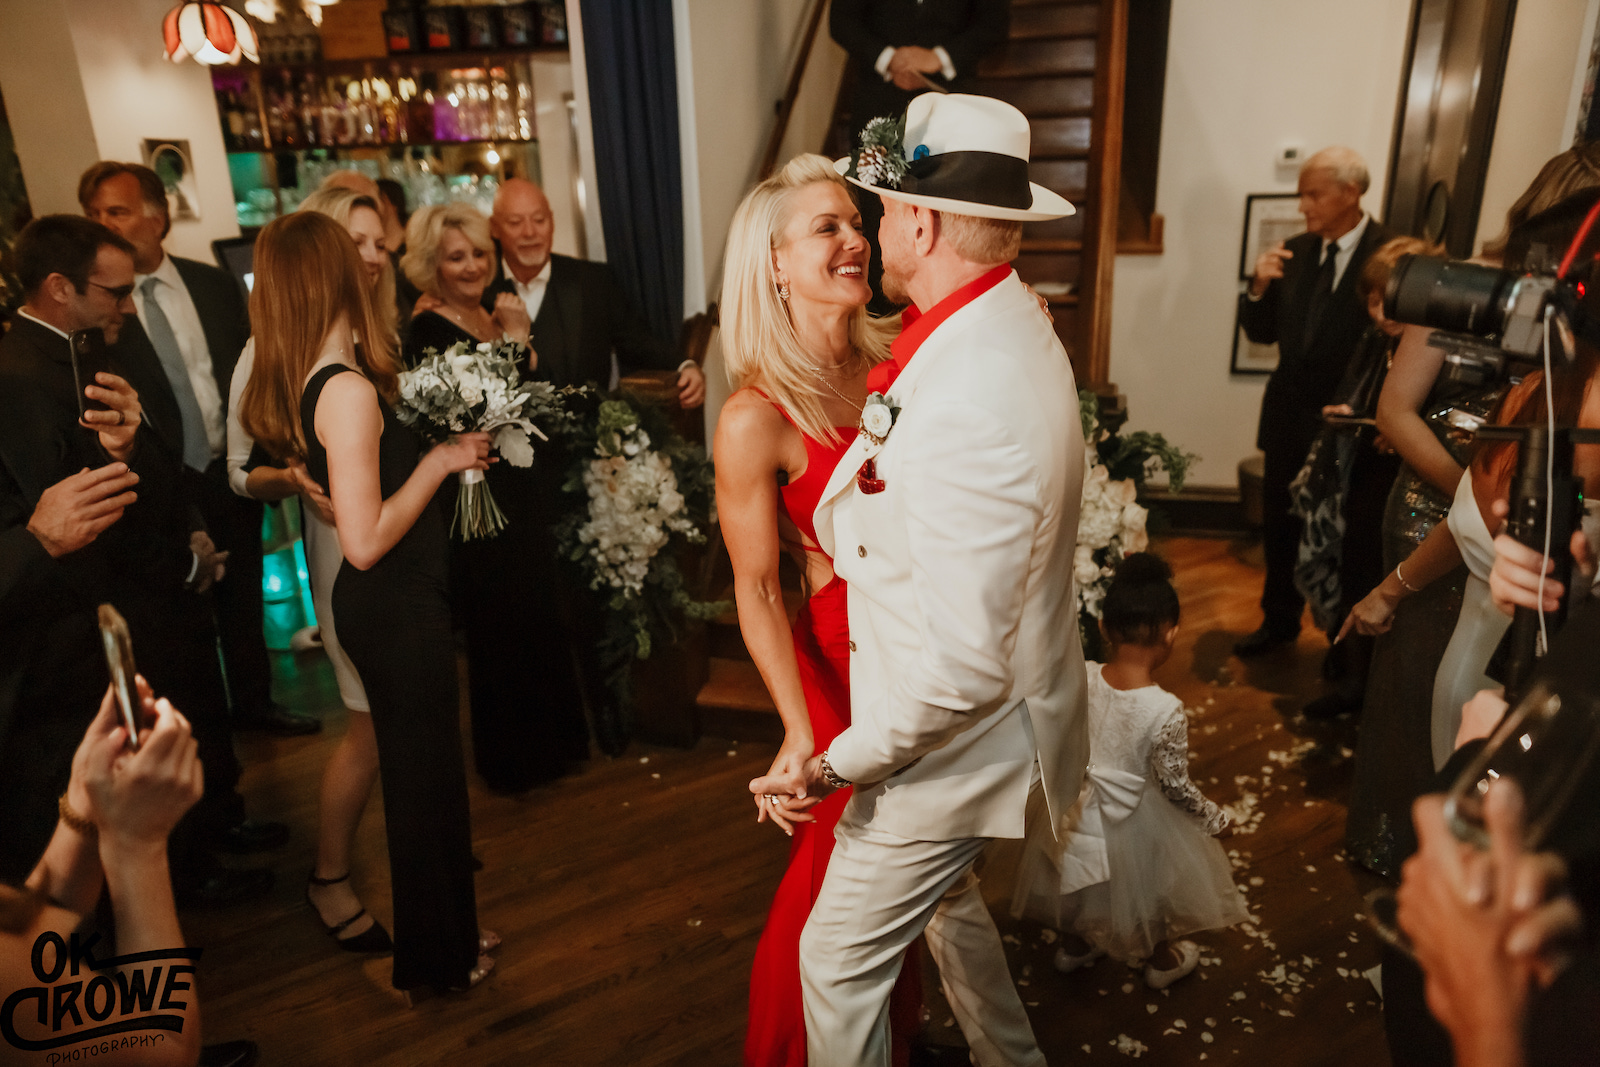 Diamond Dallas Page and Payge McMahon's first dance at The Dwell Hotel in downtown Chattanooga